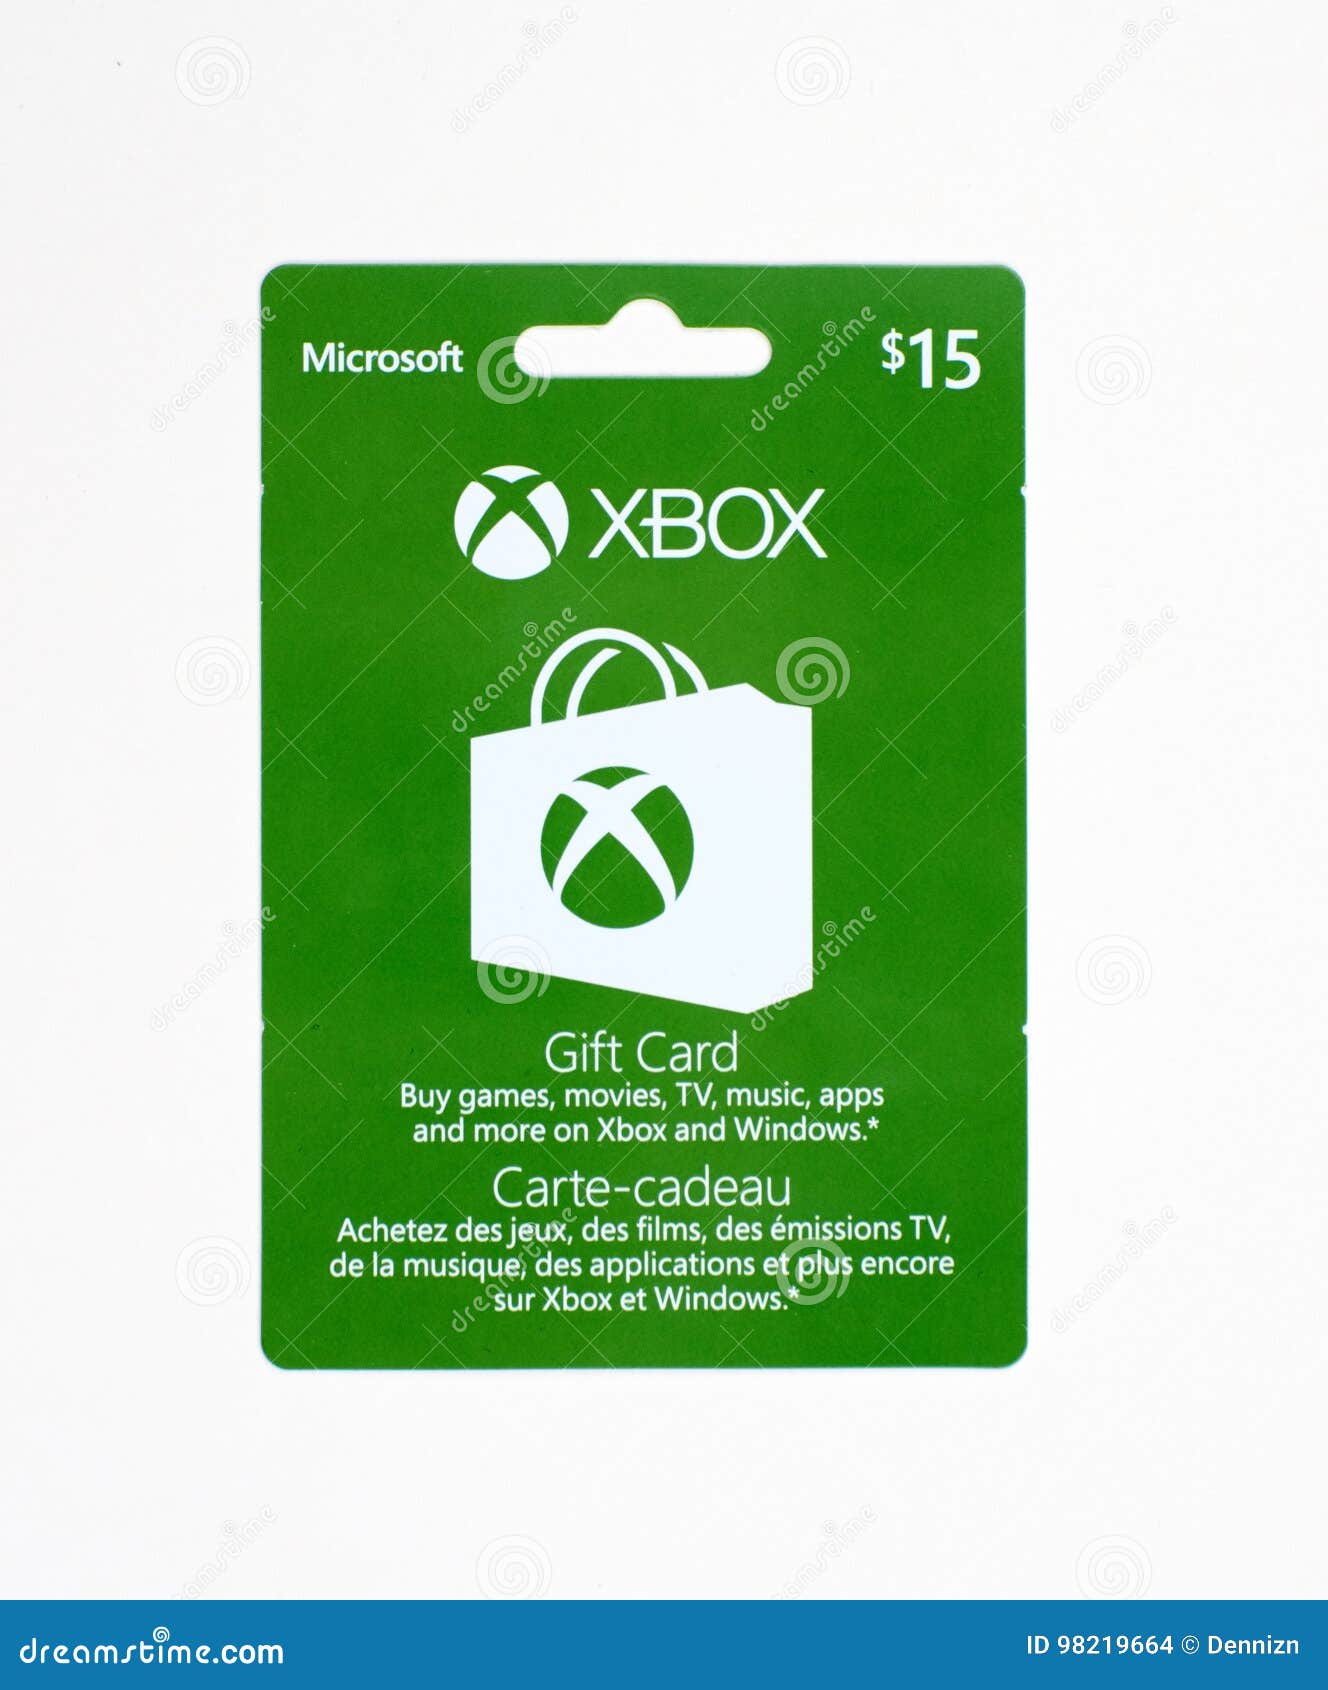 https://thumbs.dreamstime.com/z/microsoft-xbox-gift-card-white-background-montreal-canada-july-98219664.jpg